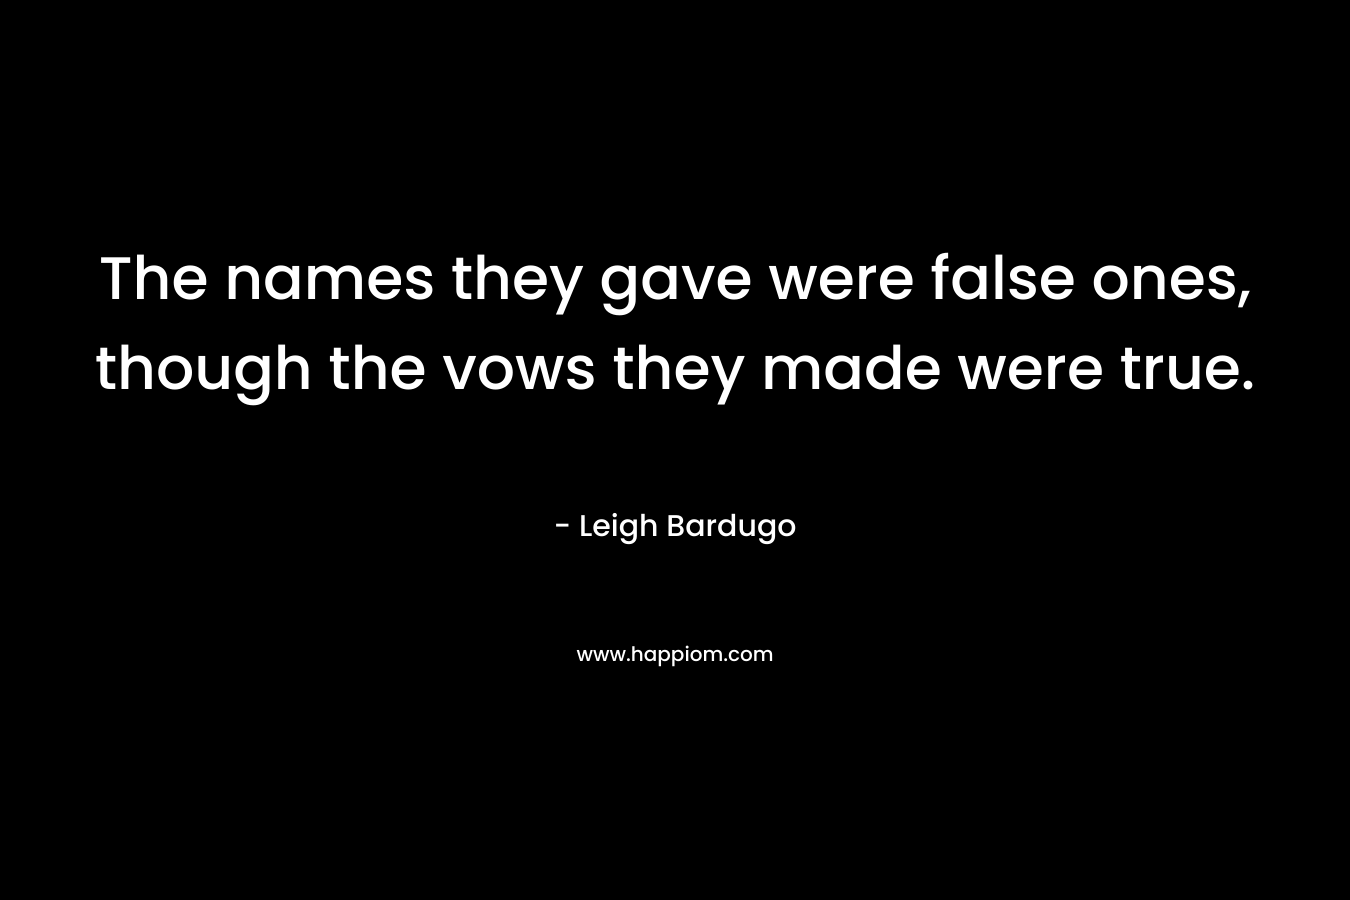 The names they gave were false ones, though the vows they made were true. – Leigh Bardugo